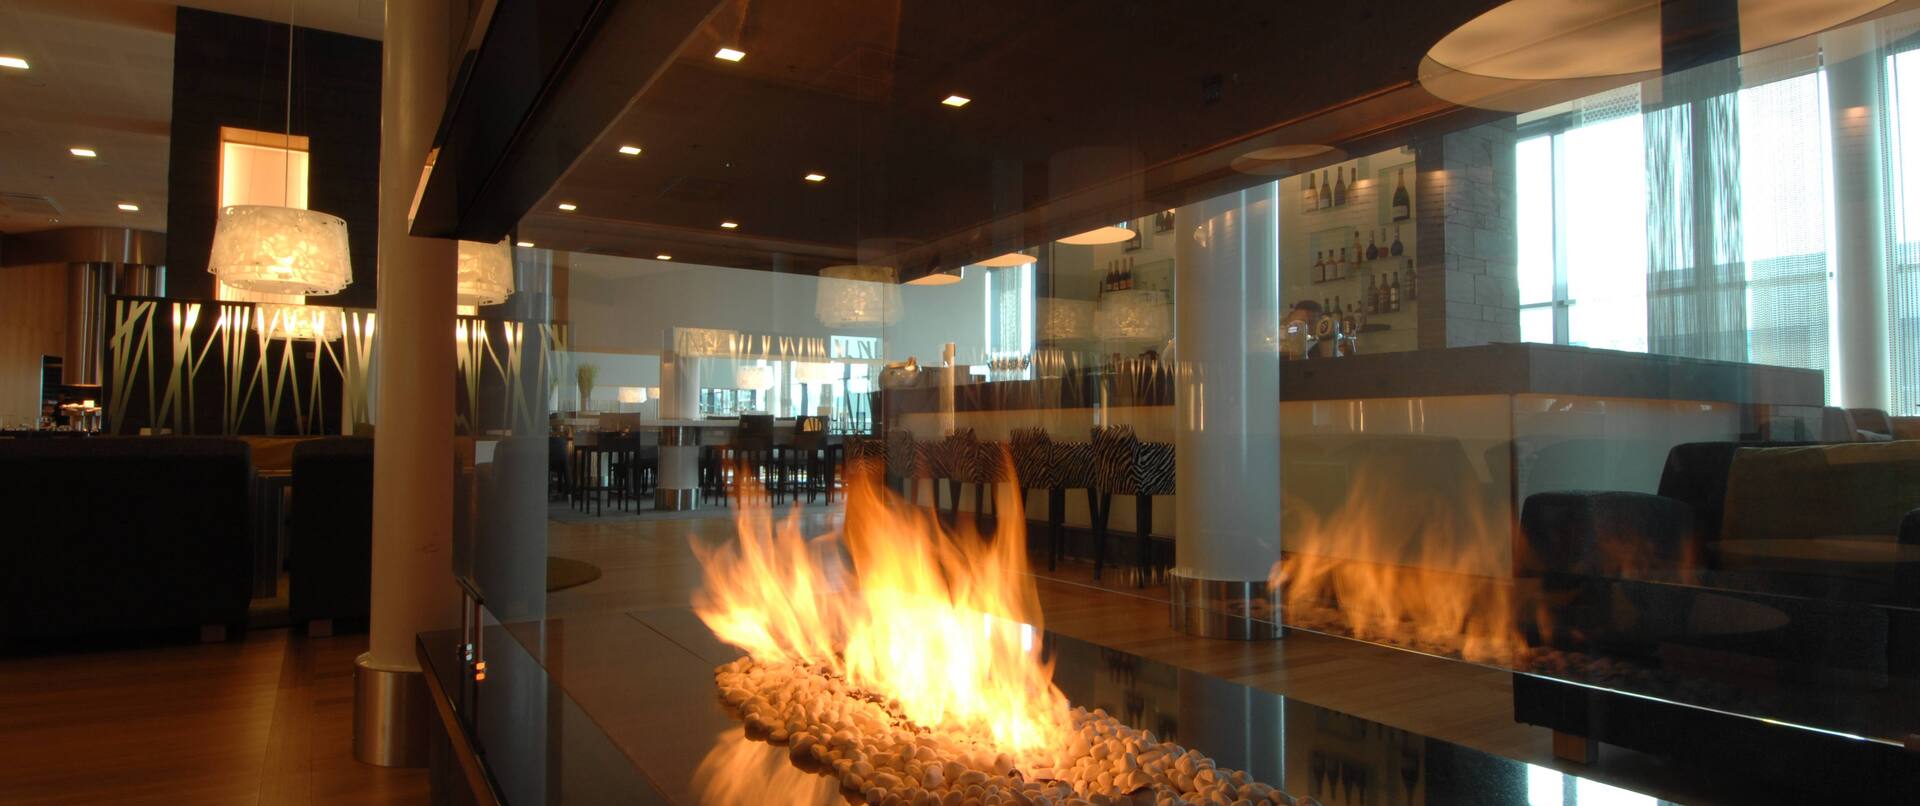 Restaurant Gui with Open Fireplace